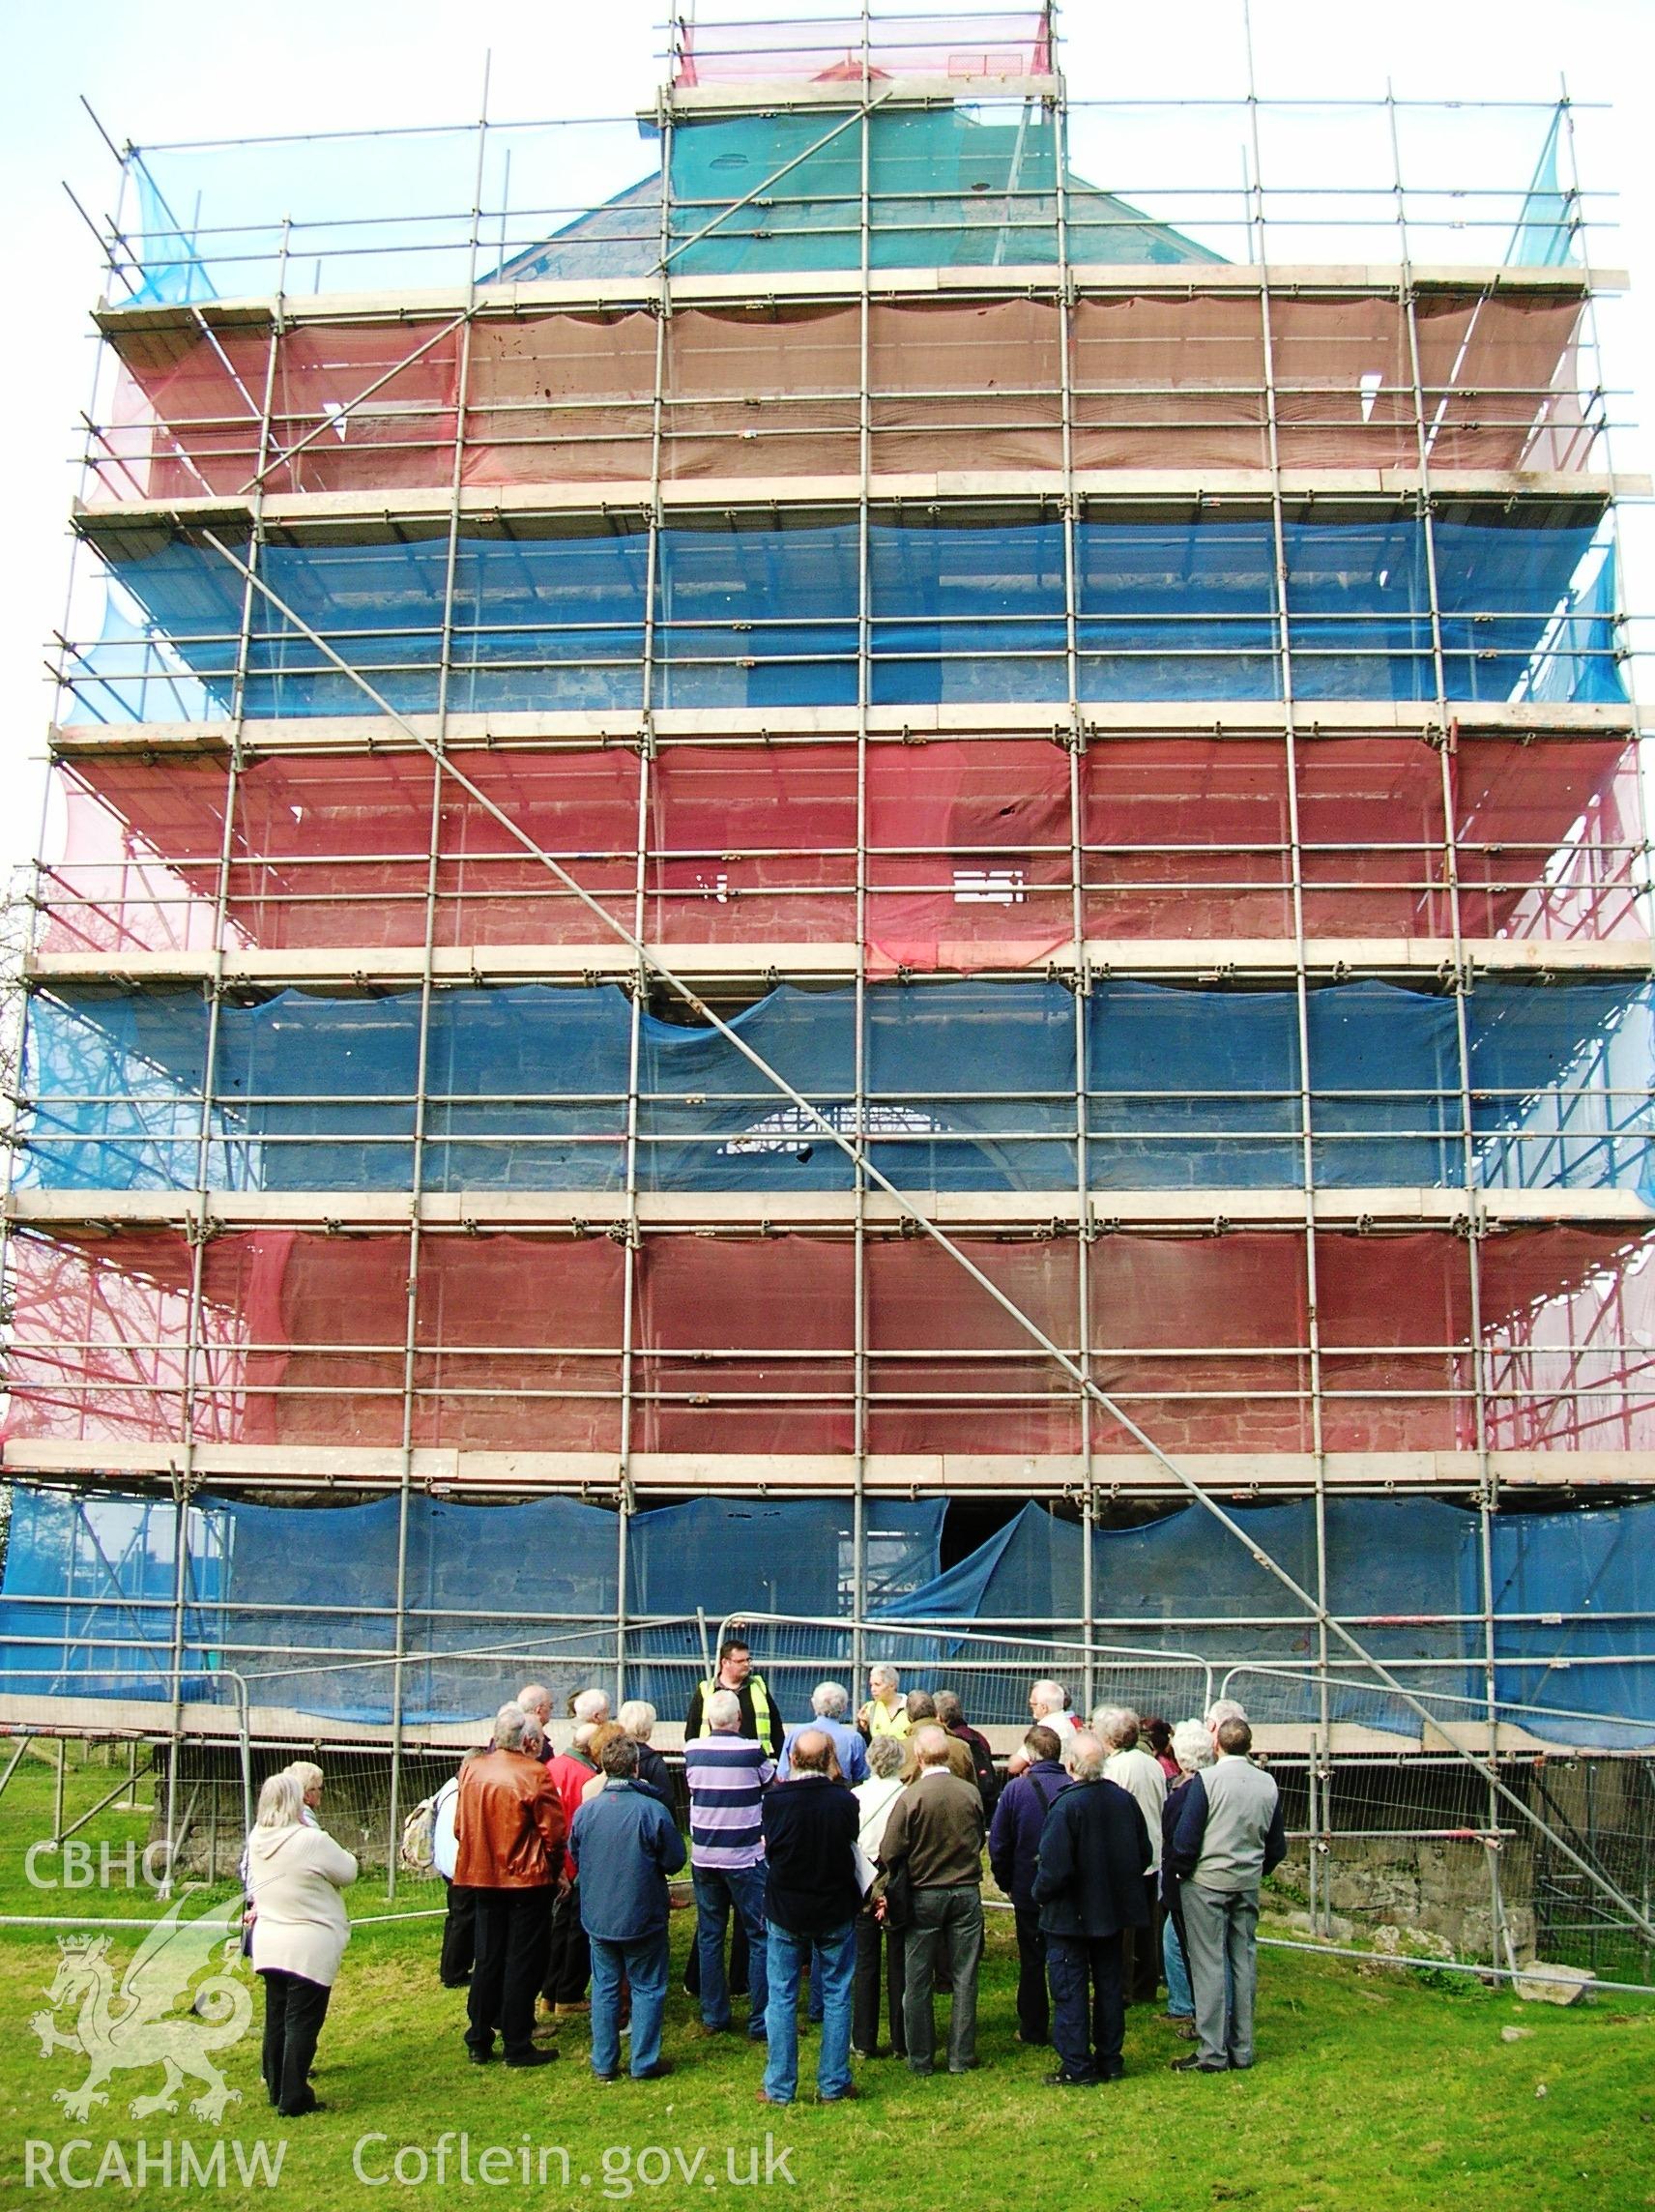 Colour photo showing scaffold around the Clive Engine House at Talar Goch Mine, produced by C.J. Williams, 2012.